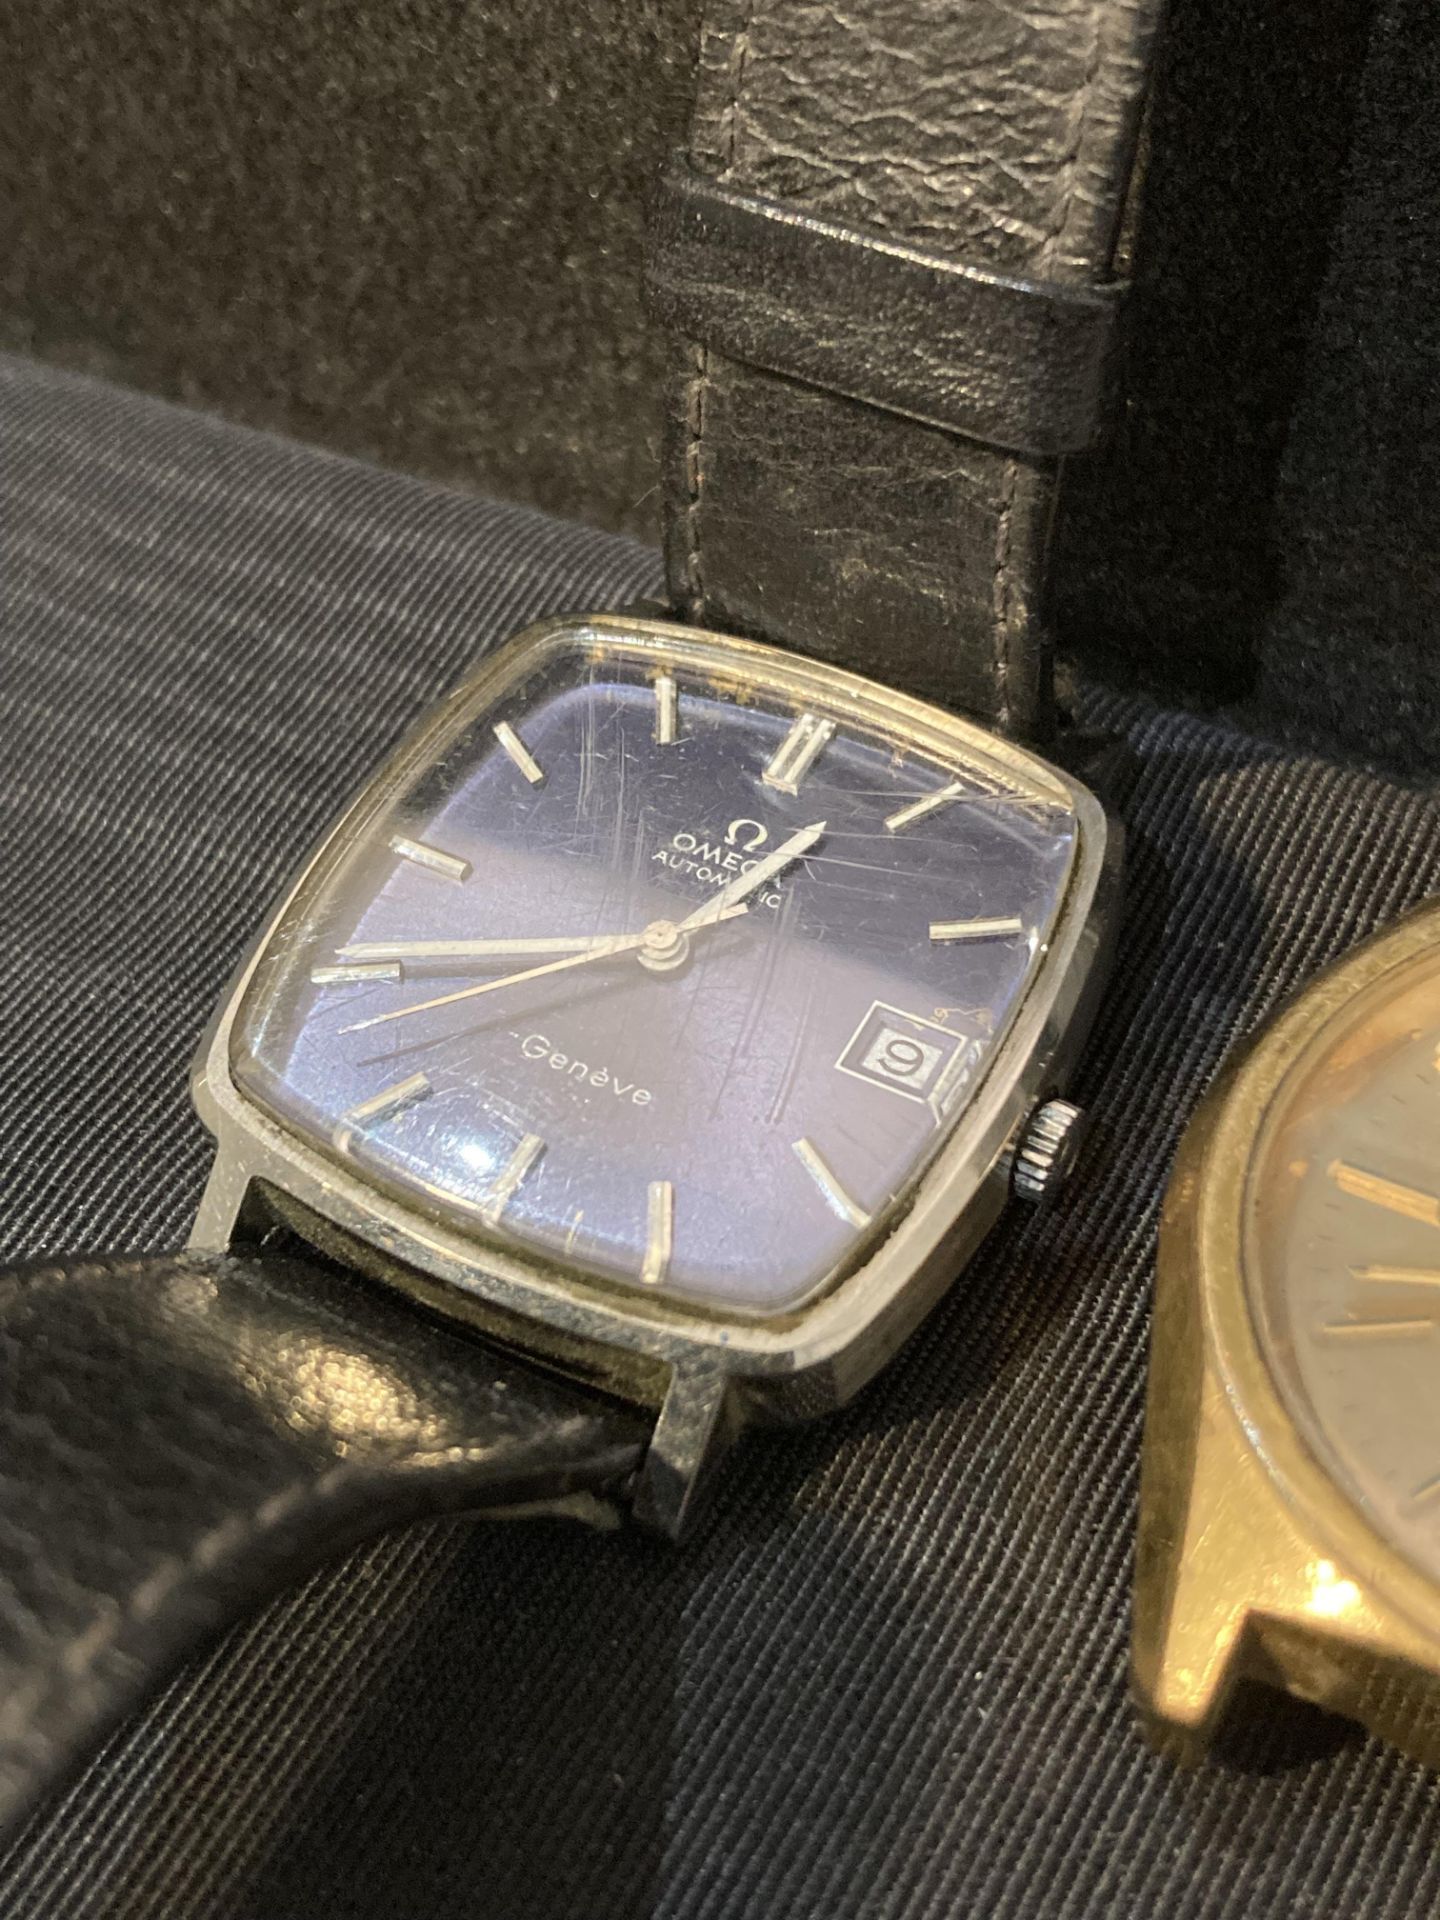 Three gents watches by Omega Automatic Geneve in working condition working with black leather trap - Image 2 of 4